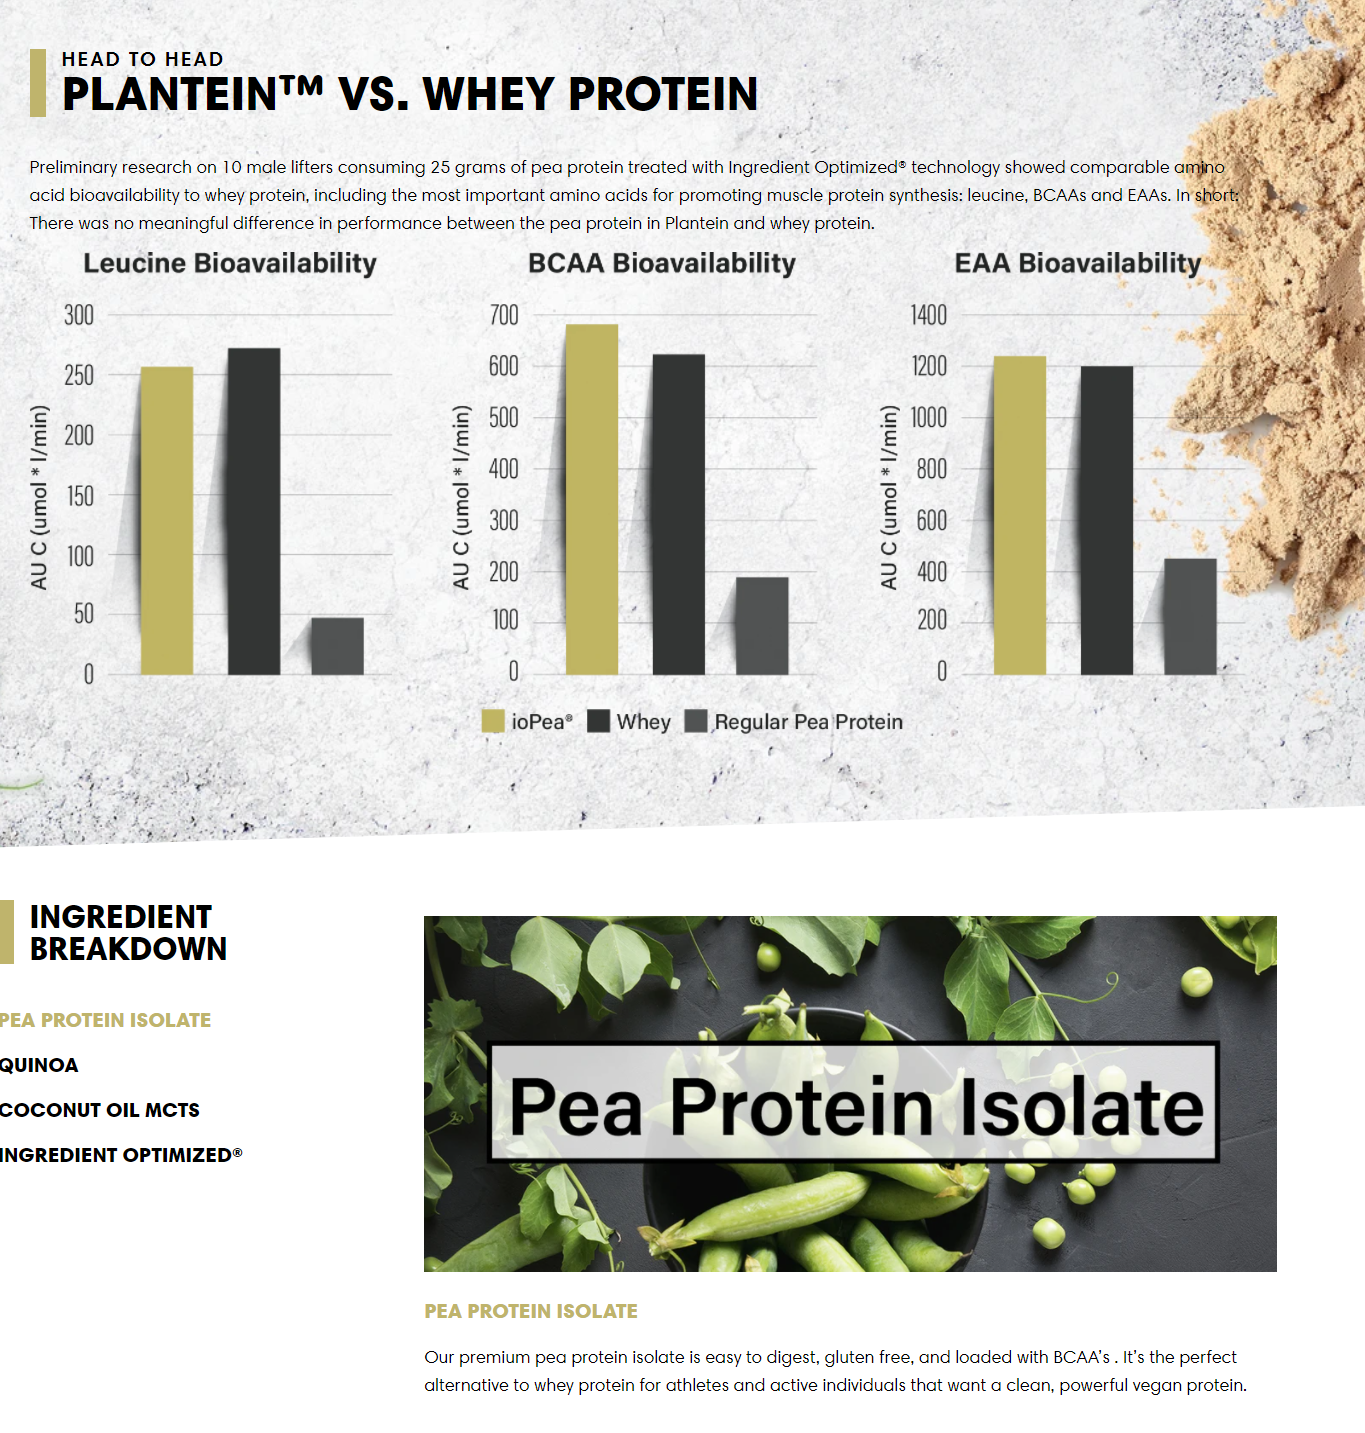 Research shows that pea protein treated with Ingredient Optimized technology matches the amino acid bioavailability of whey protein for muscle protein synthesis.